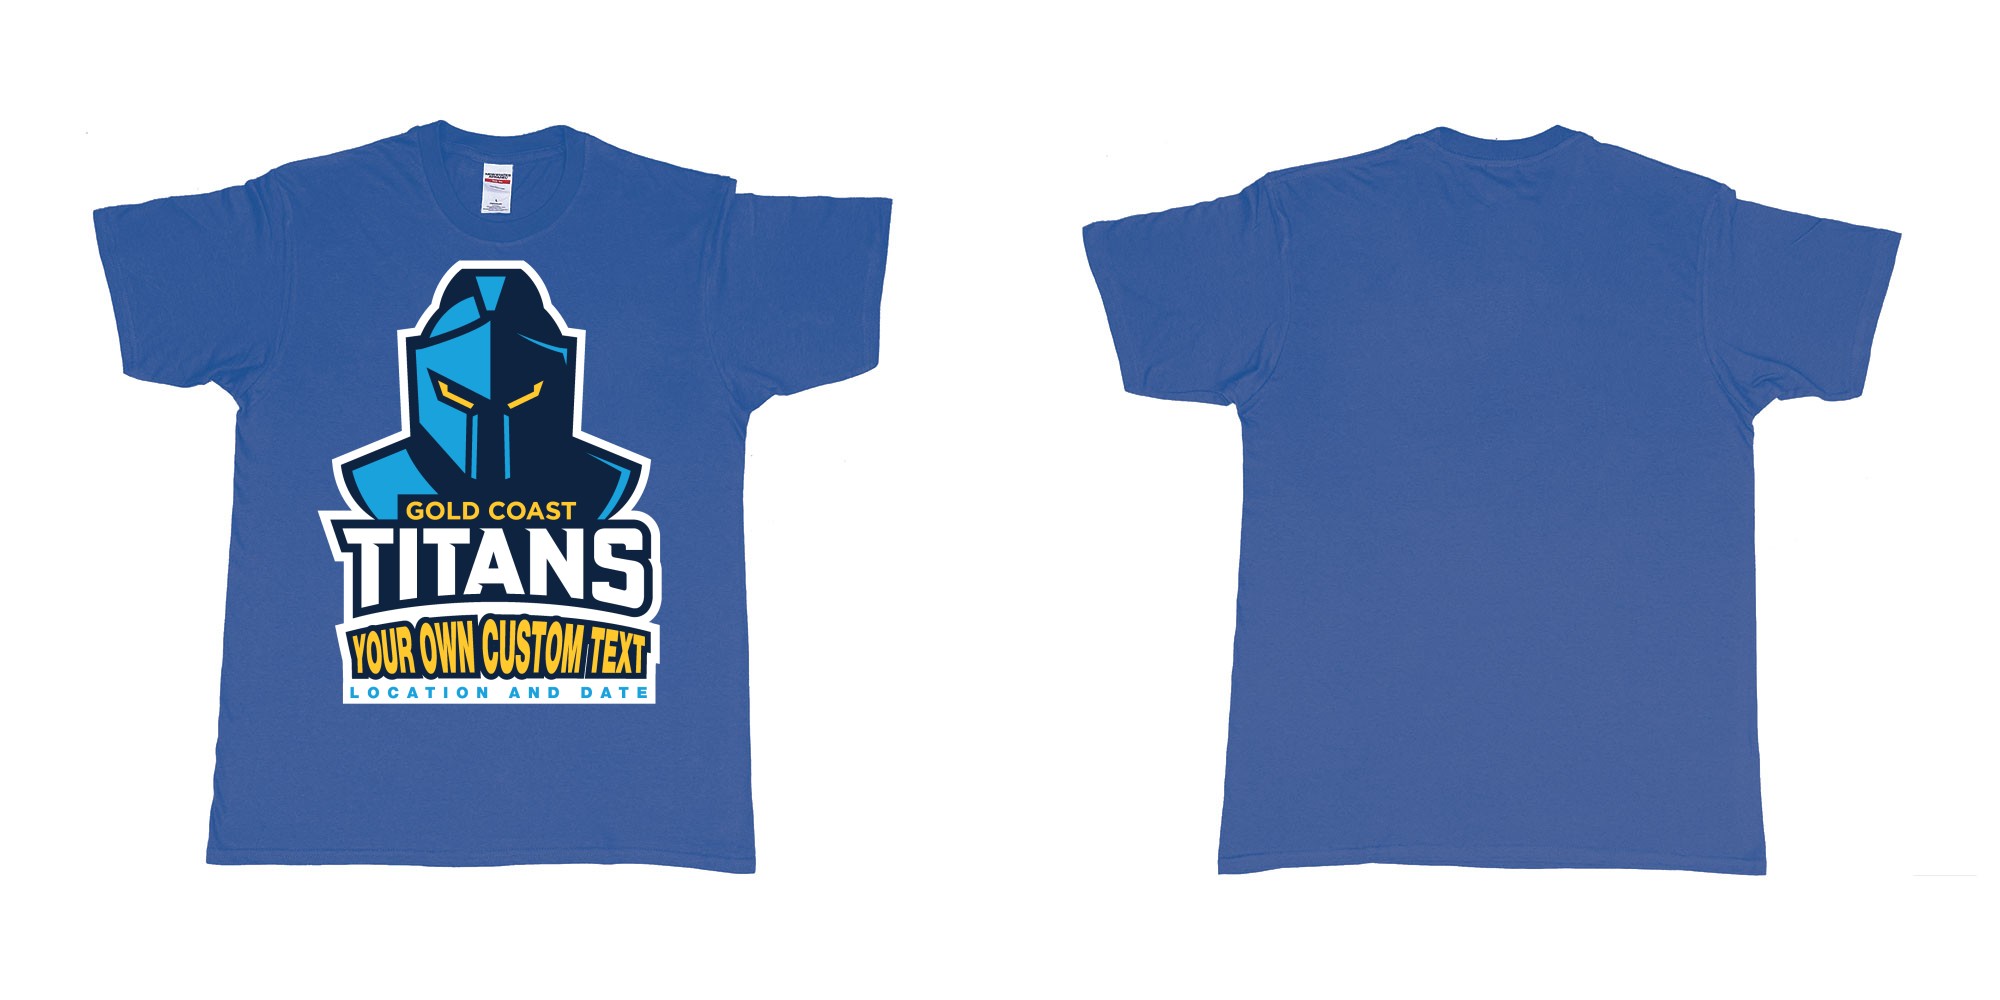 Custom tshirt design gold coast titans own custom design print in fabric color royal-blue choice your own text made in Bali by The Pirate Way